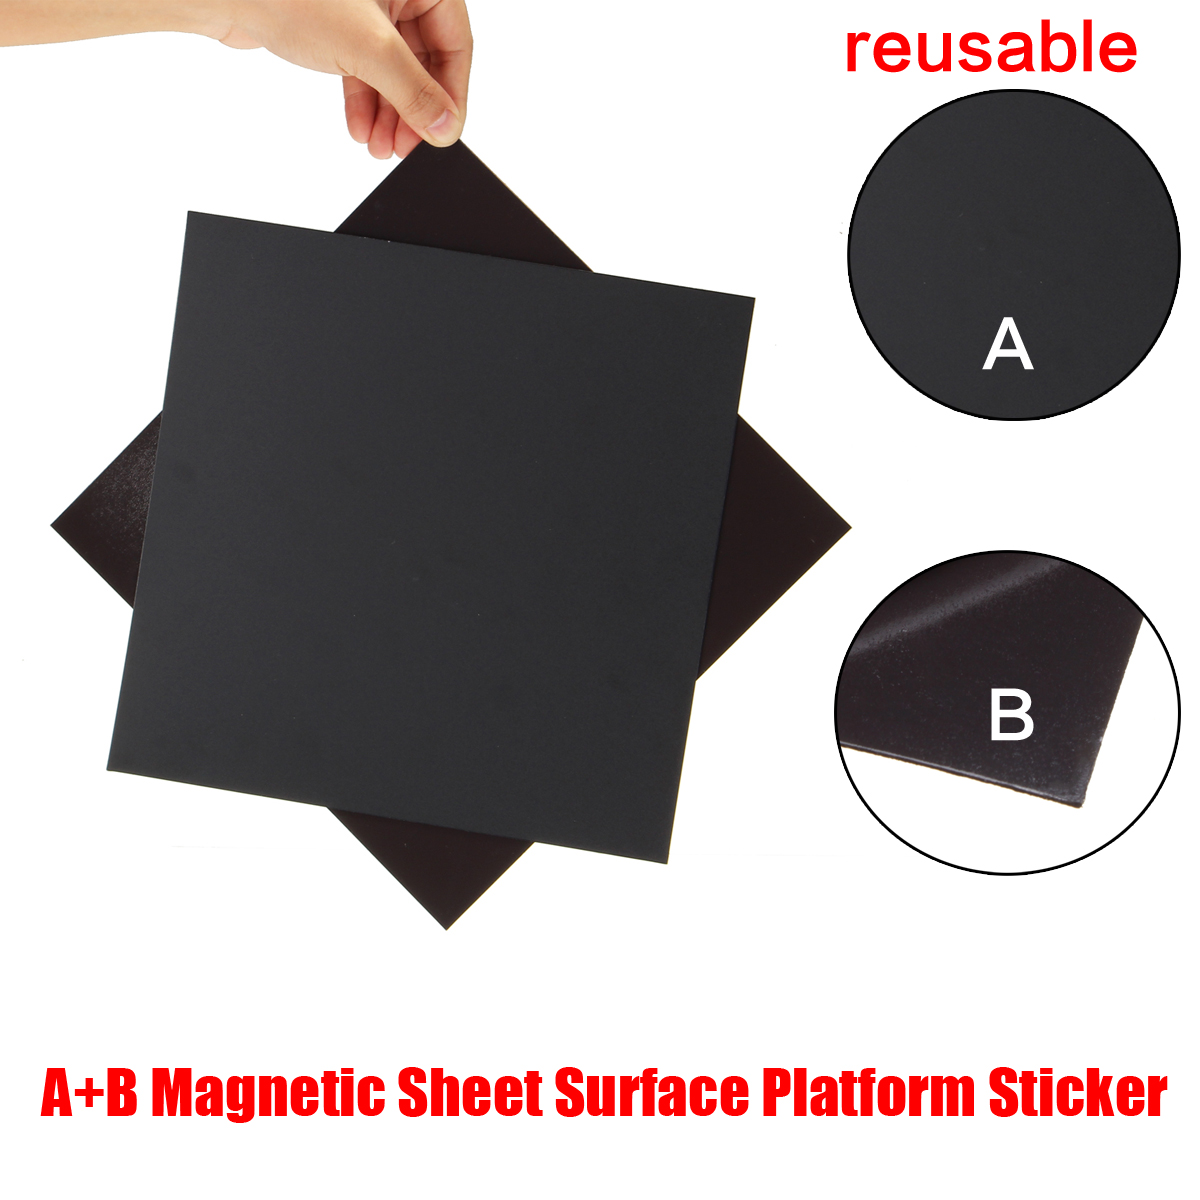 22x22cm A+B Magnetic Sheet Surface Platform Sticker For 3D Printer Creality Ender-3 Heated Bed 16